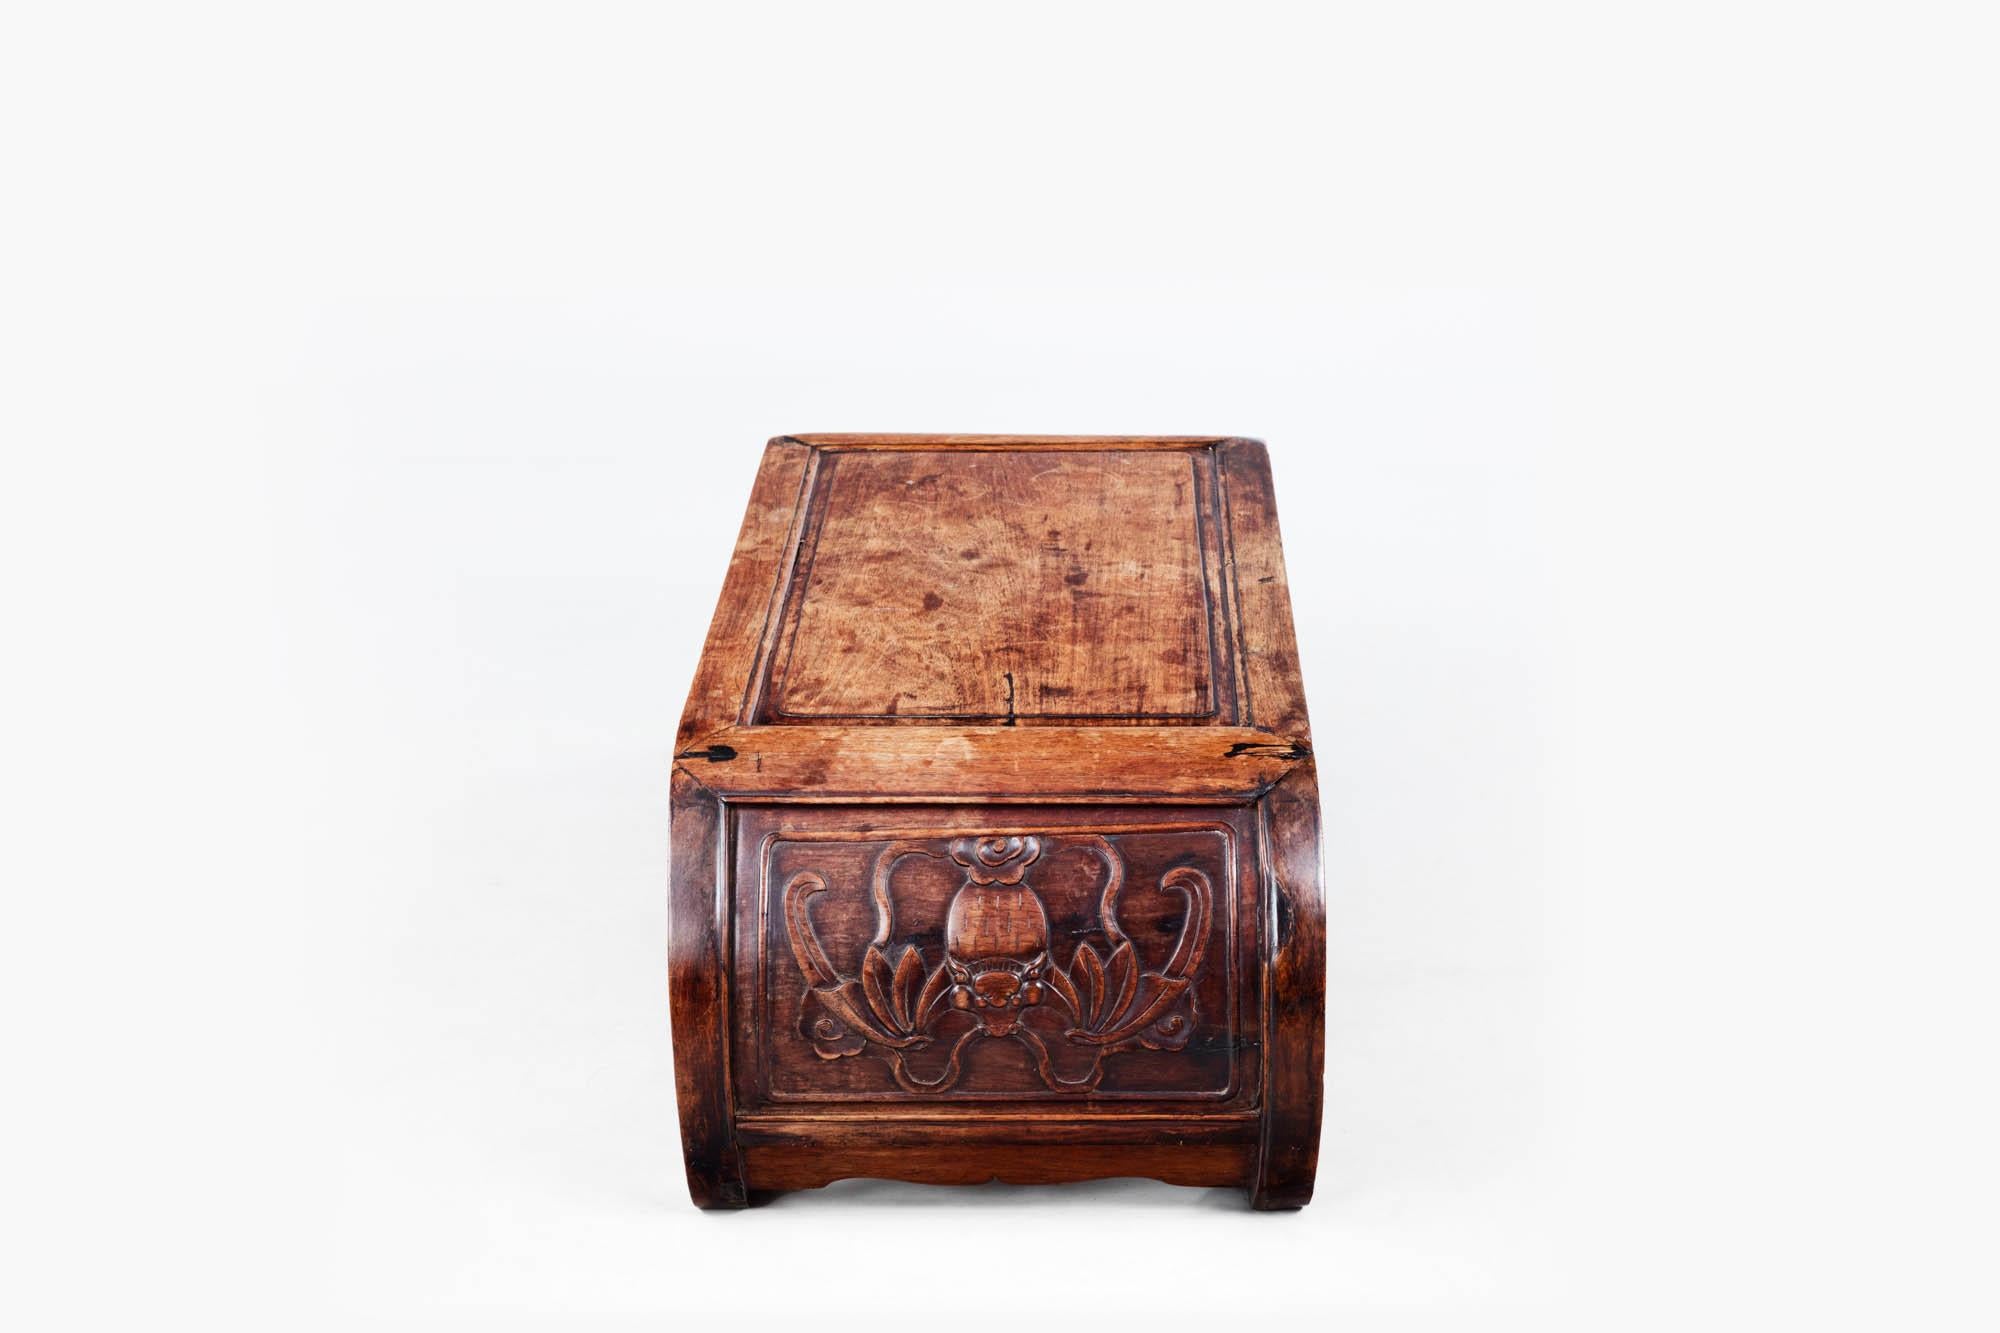 Early 19th century Qing Dynasty period Chinese hardwood low Kang table. The curved body terminates in scrolled feet and the sides are carved with naturalistic symbols of animals and flora. A beveled rectangular central board sits above open fretwork